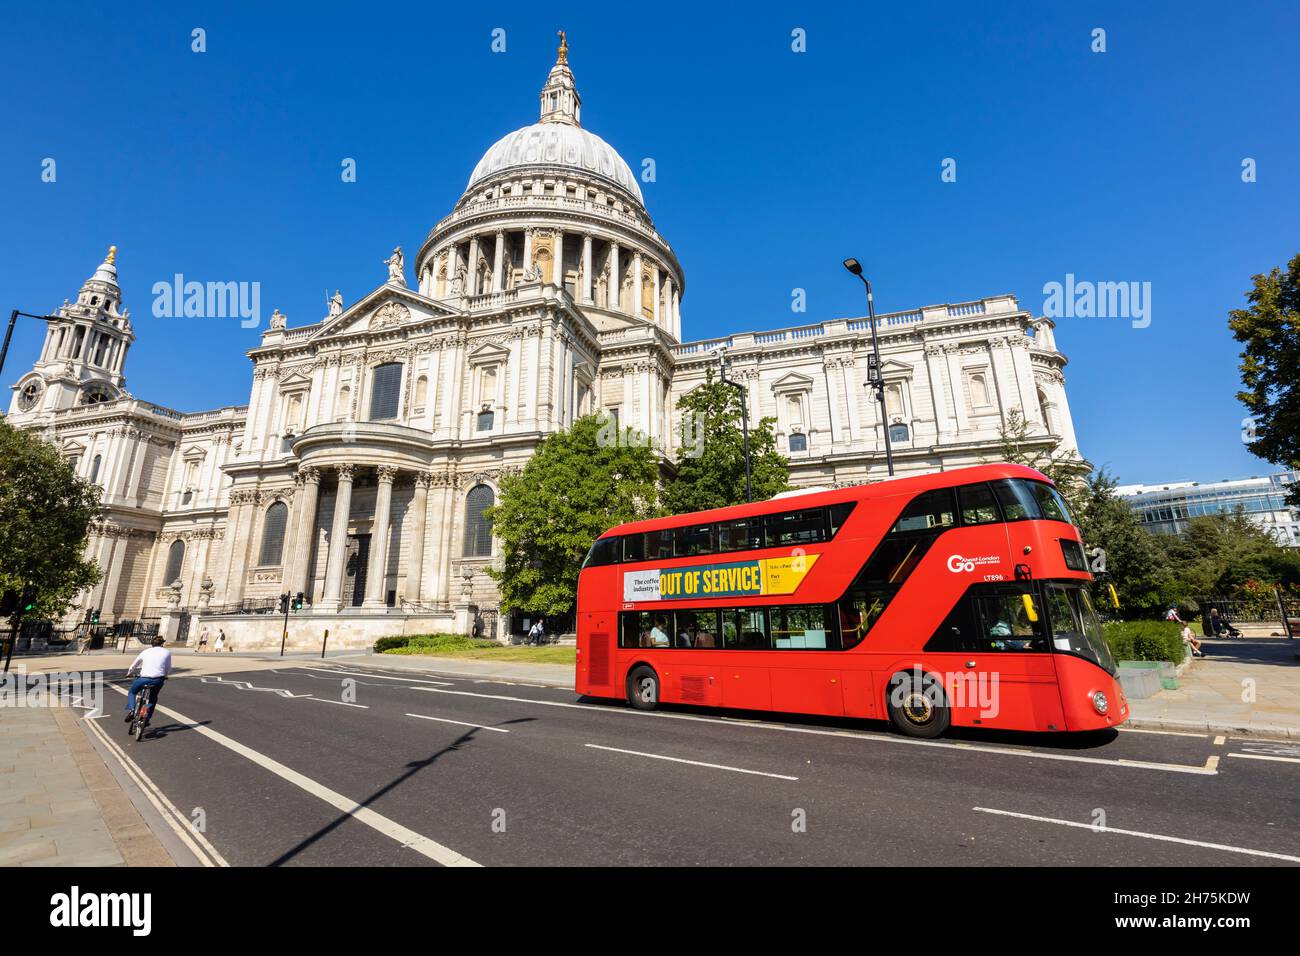 A double decker red London bus in front of the iconic St Paul's Cathedral by Sir Christopher Wren  in the City of London Stock Photo